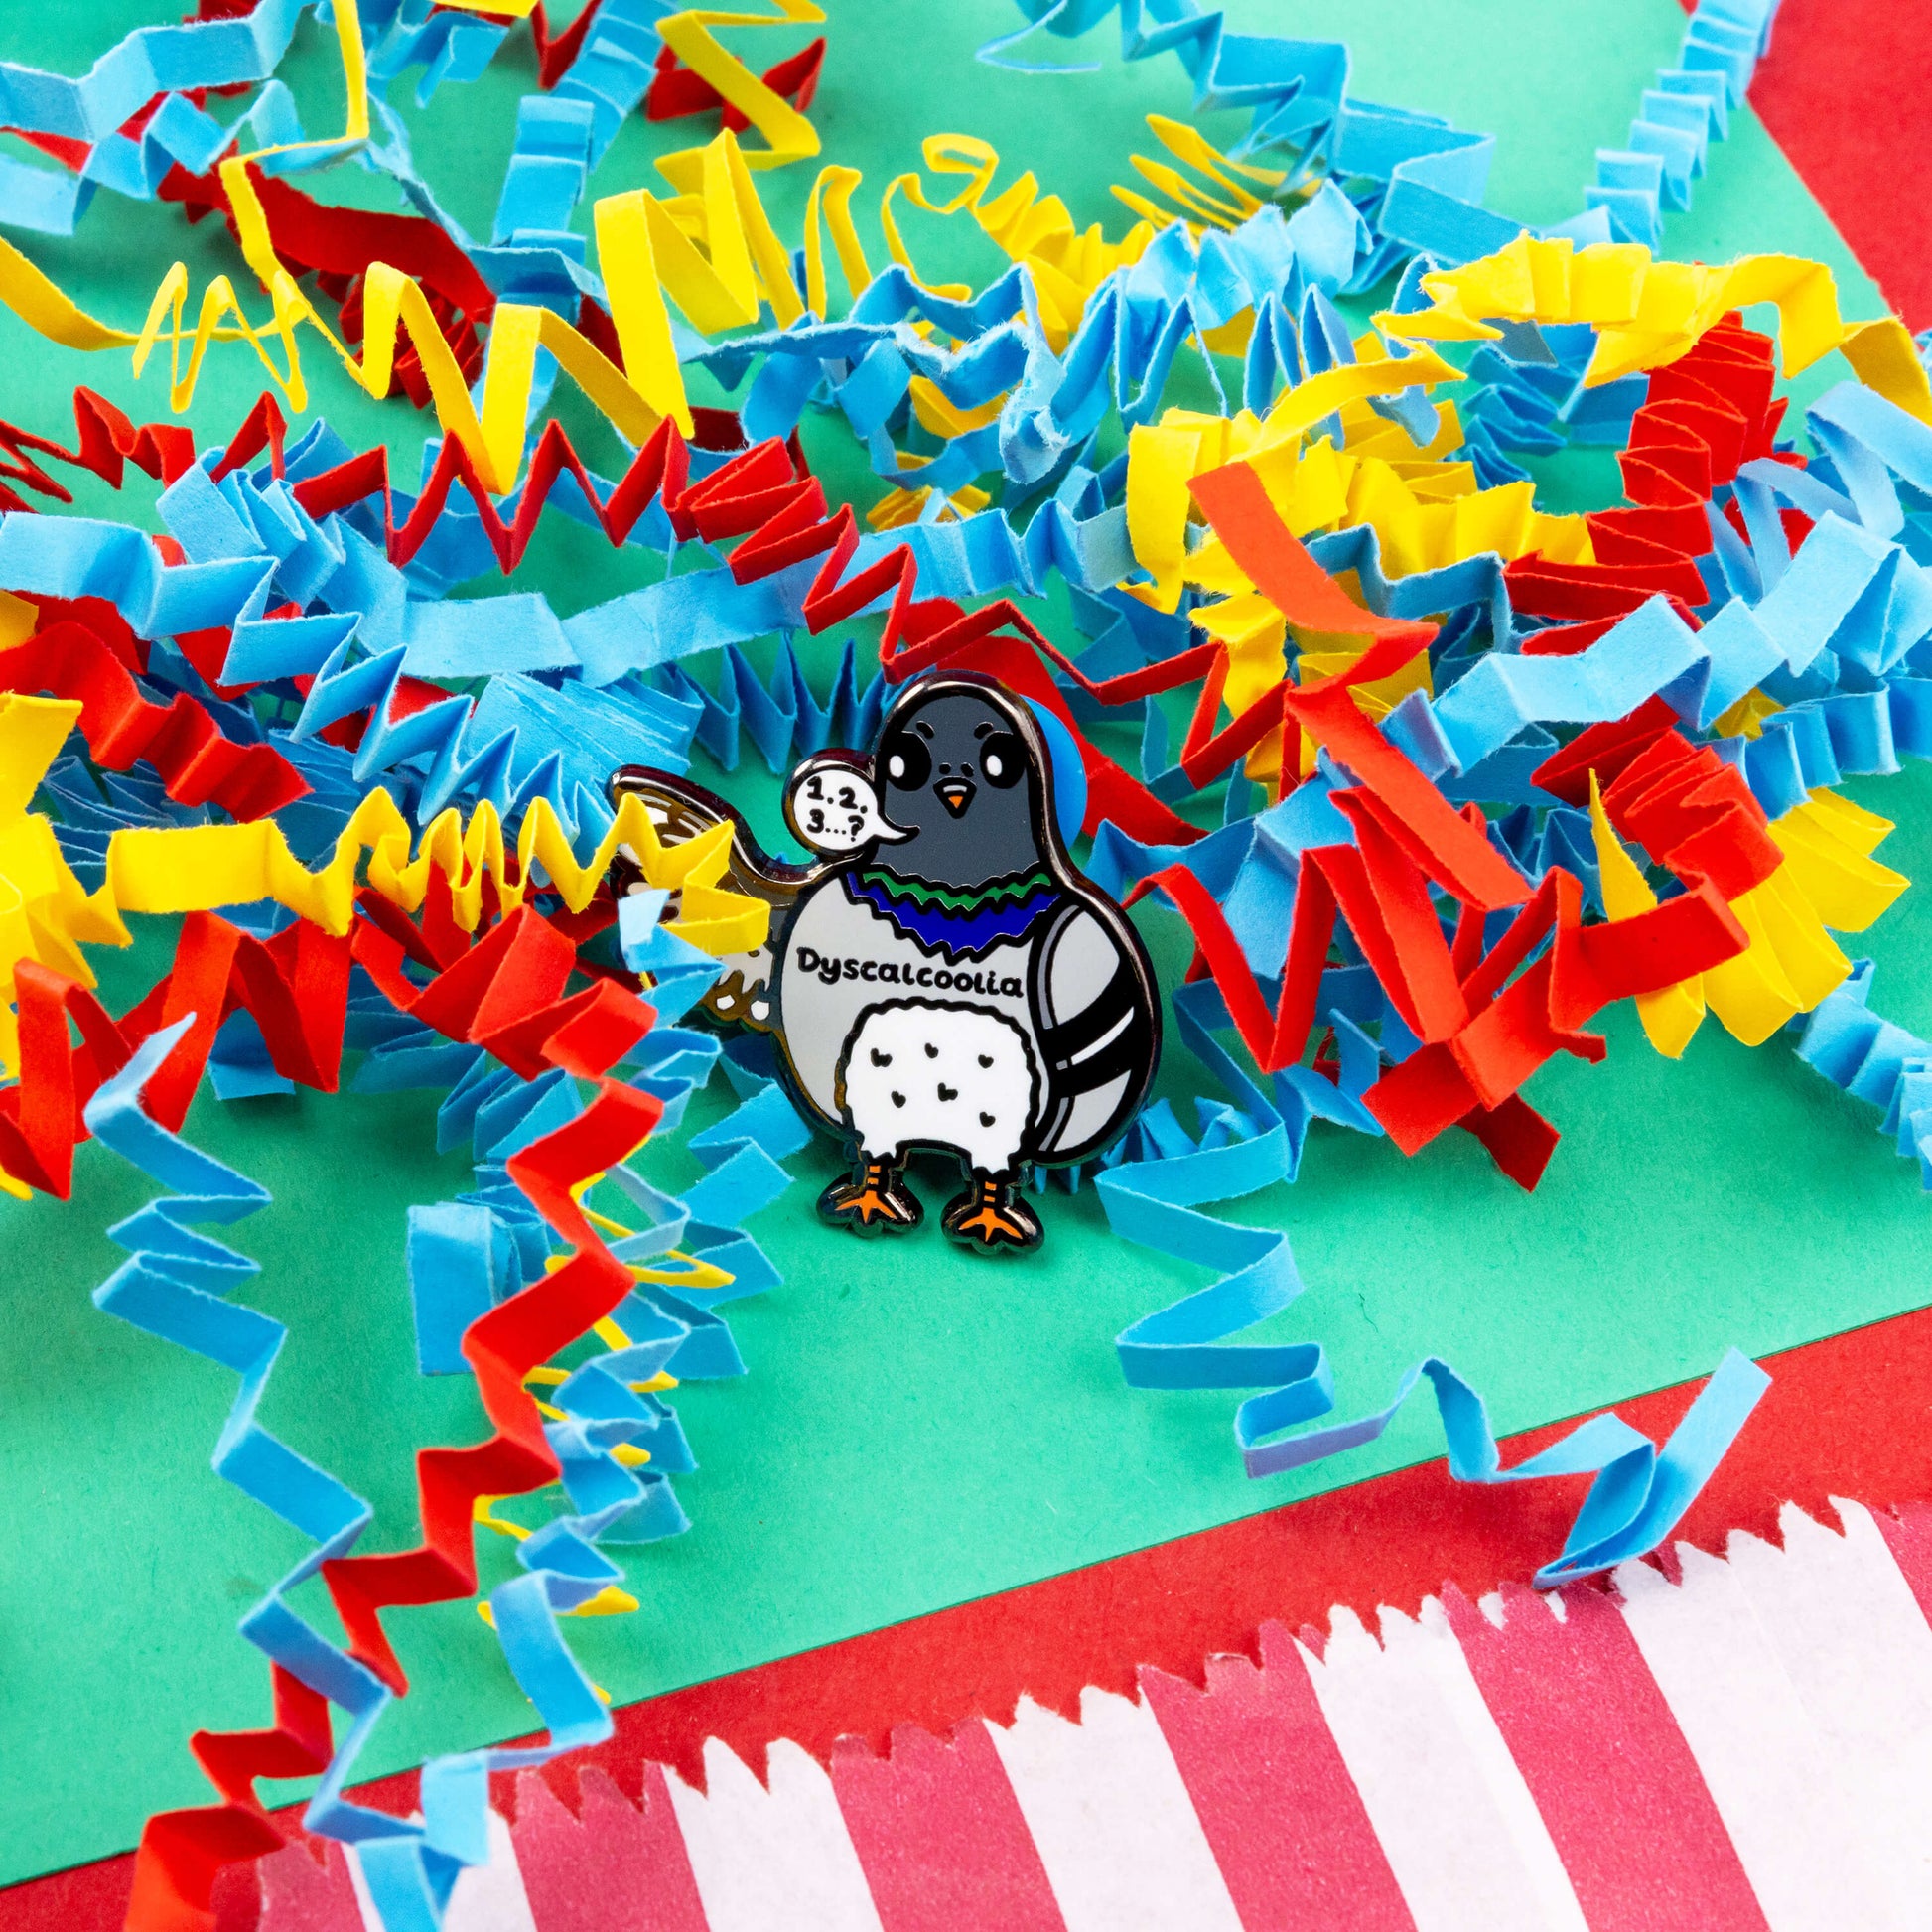 The Dyscalcoolia Pigeon Enamel Pin - Dyscalculia on a red, blue, green and yellow crinkle card confetti background. A Pigeon looking confused holding up a wing with a speech bubble full of numbers and a question mark across its chest reads 'dyscalcoolia'. The enamel pin is raising awareness for dyscalculia.